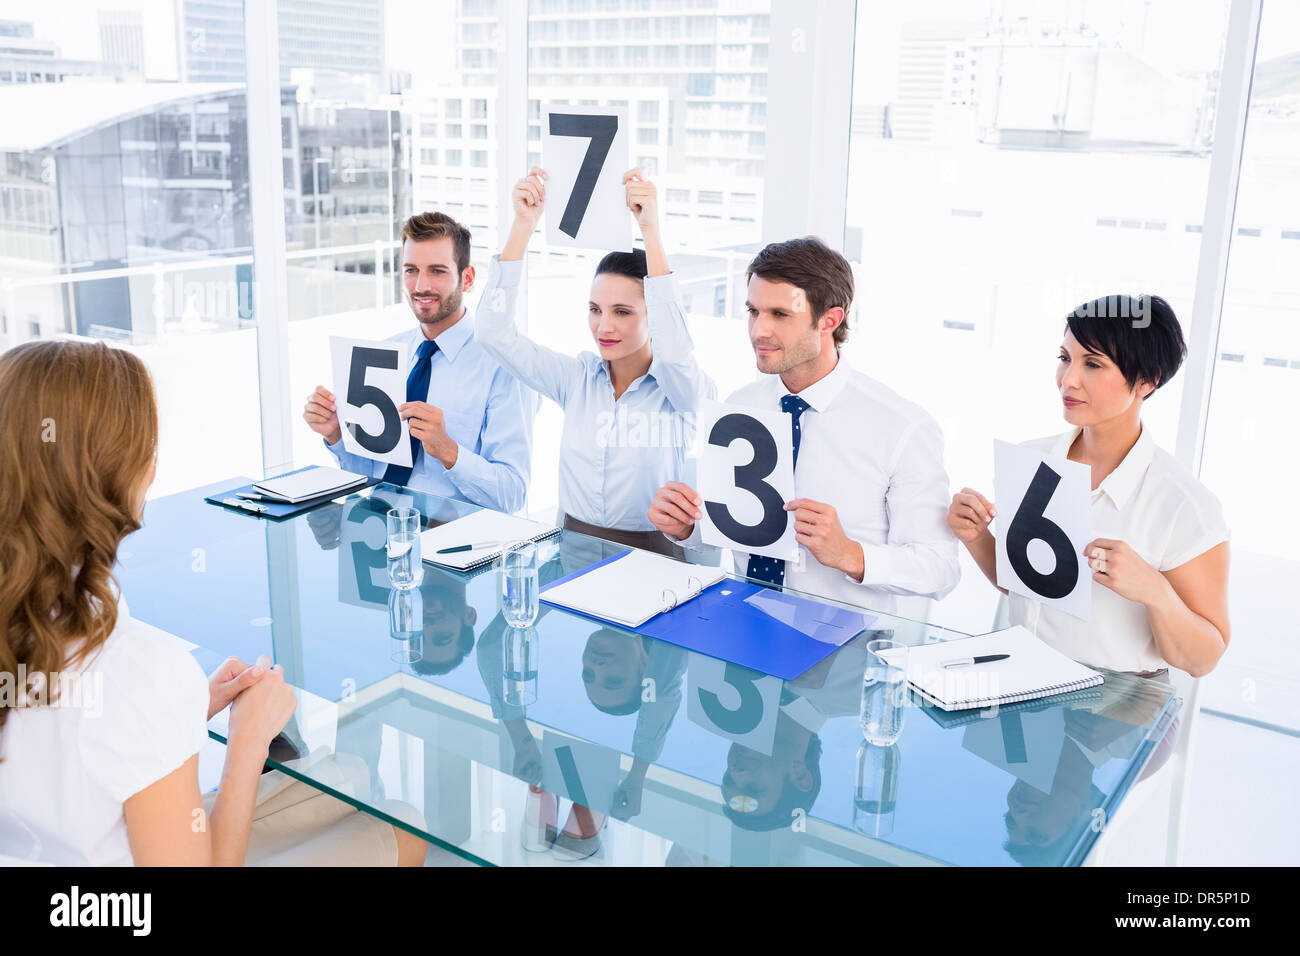 Group of panel judges holding score signs in front of woman Stock Photo